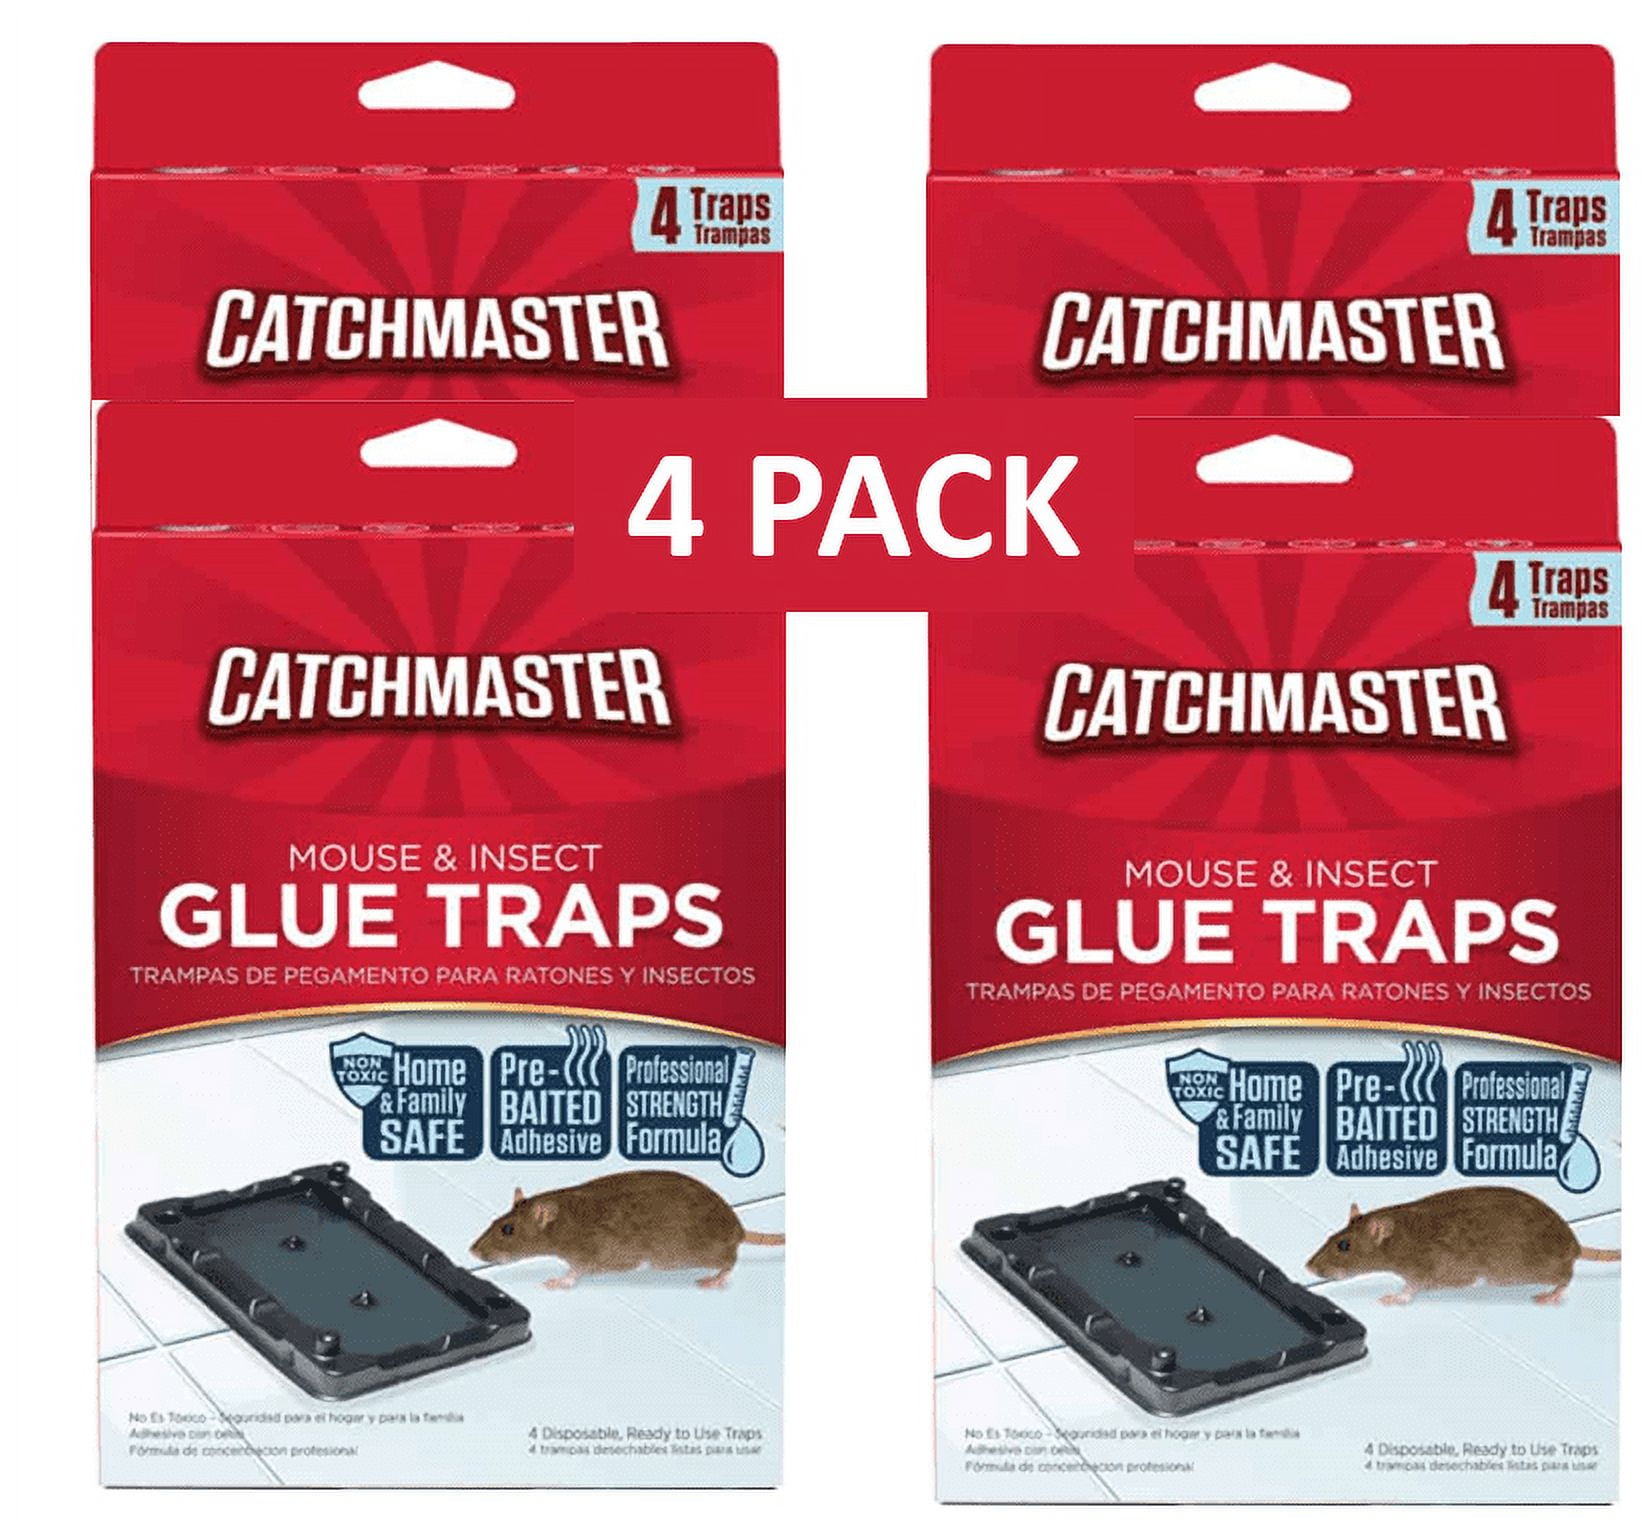 Catchmaster Heavy Duty Baited Rat Glue Traps, 2 Count